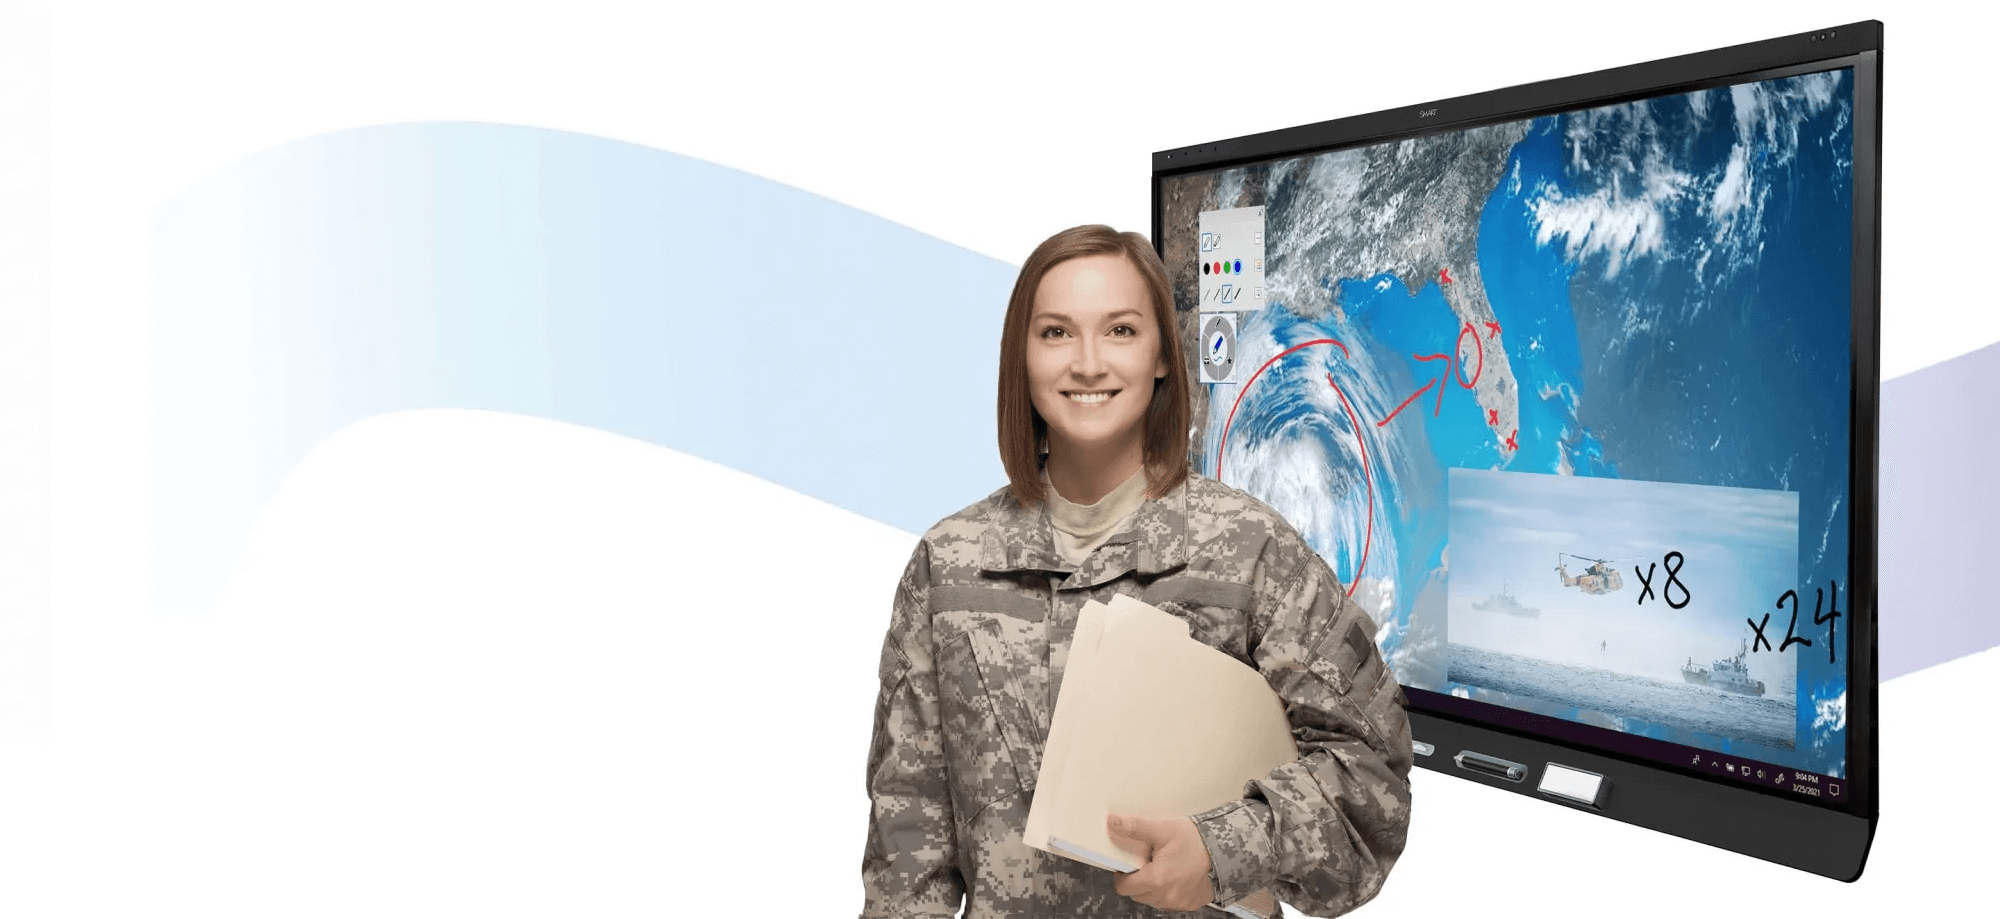 Woman in military uniform holding a folder stands beside a SMART interactive display showcasing satellite imagery of a cyclone, with various annotations and smaller images, including helicopters and ships.